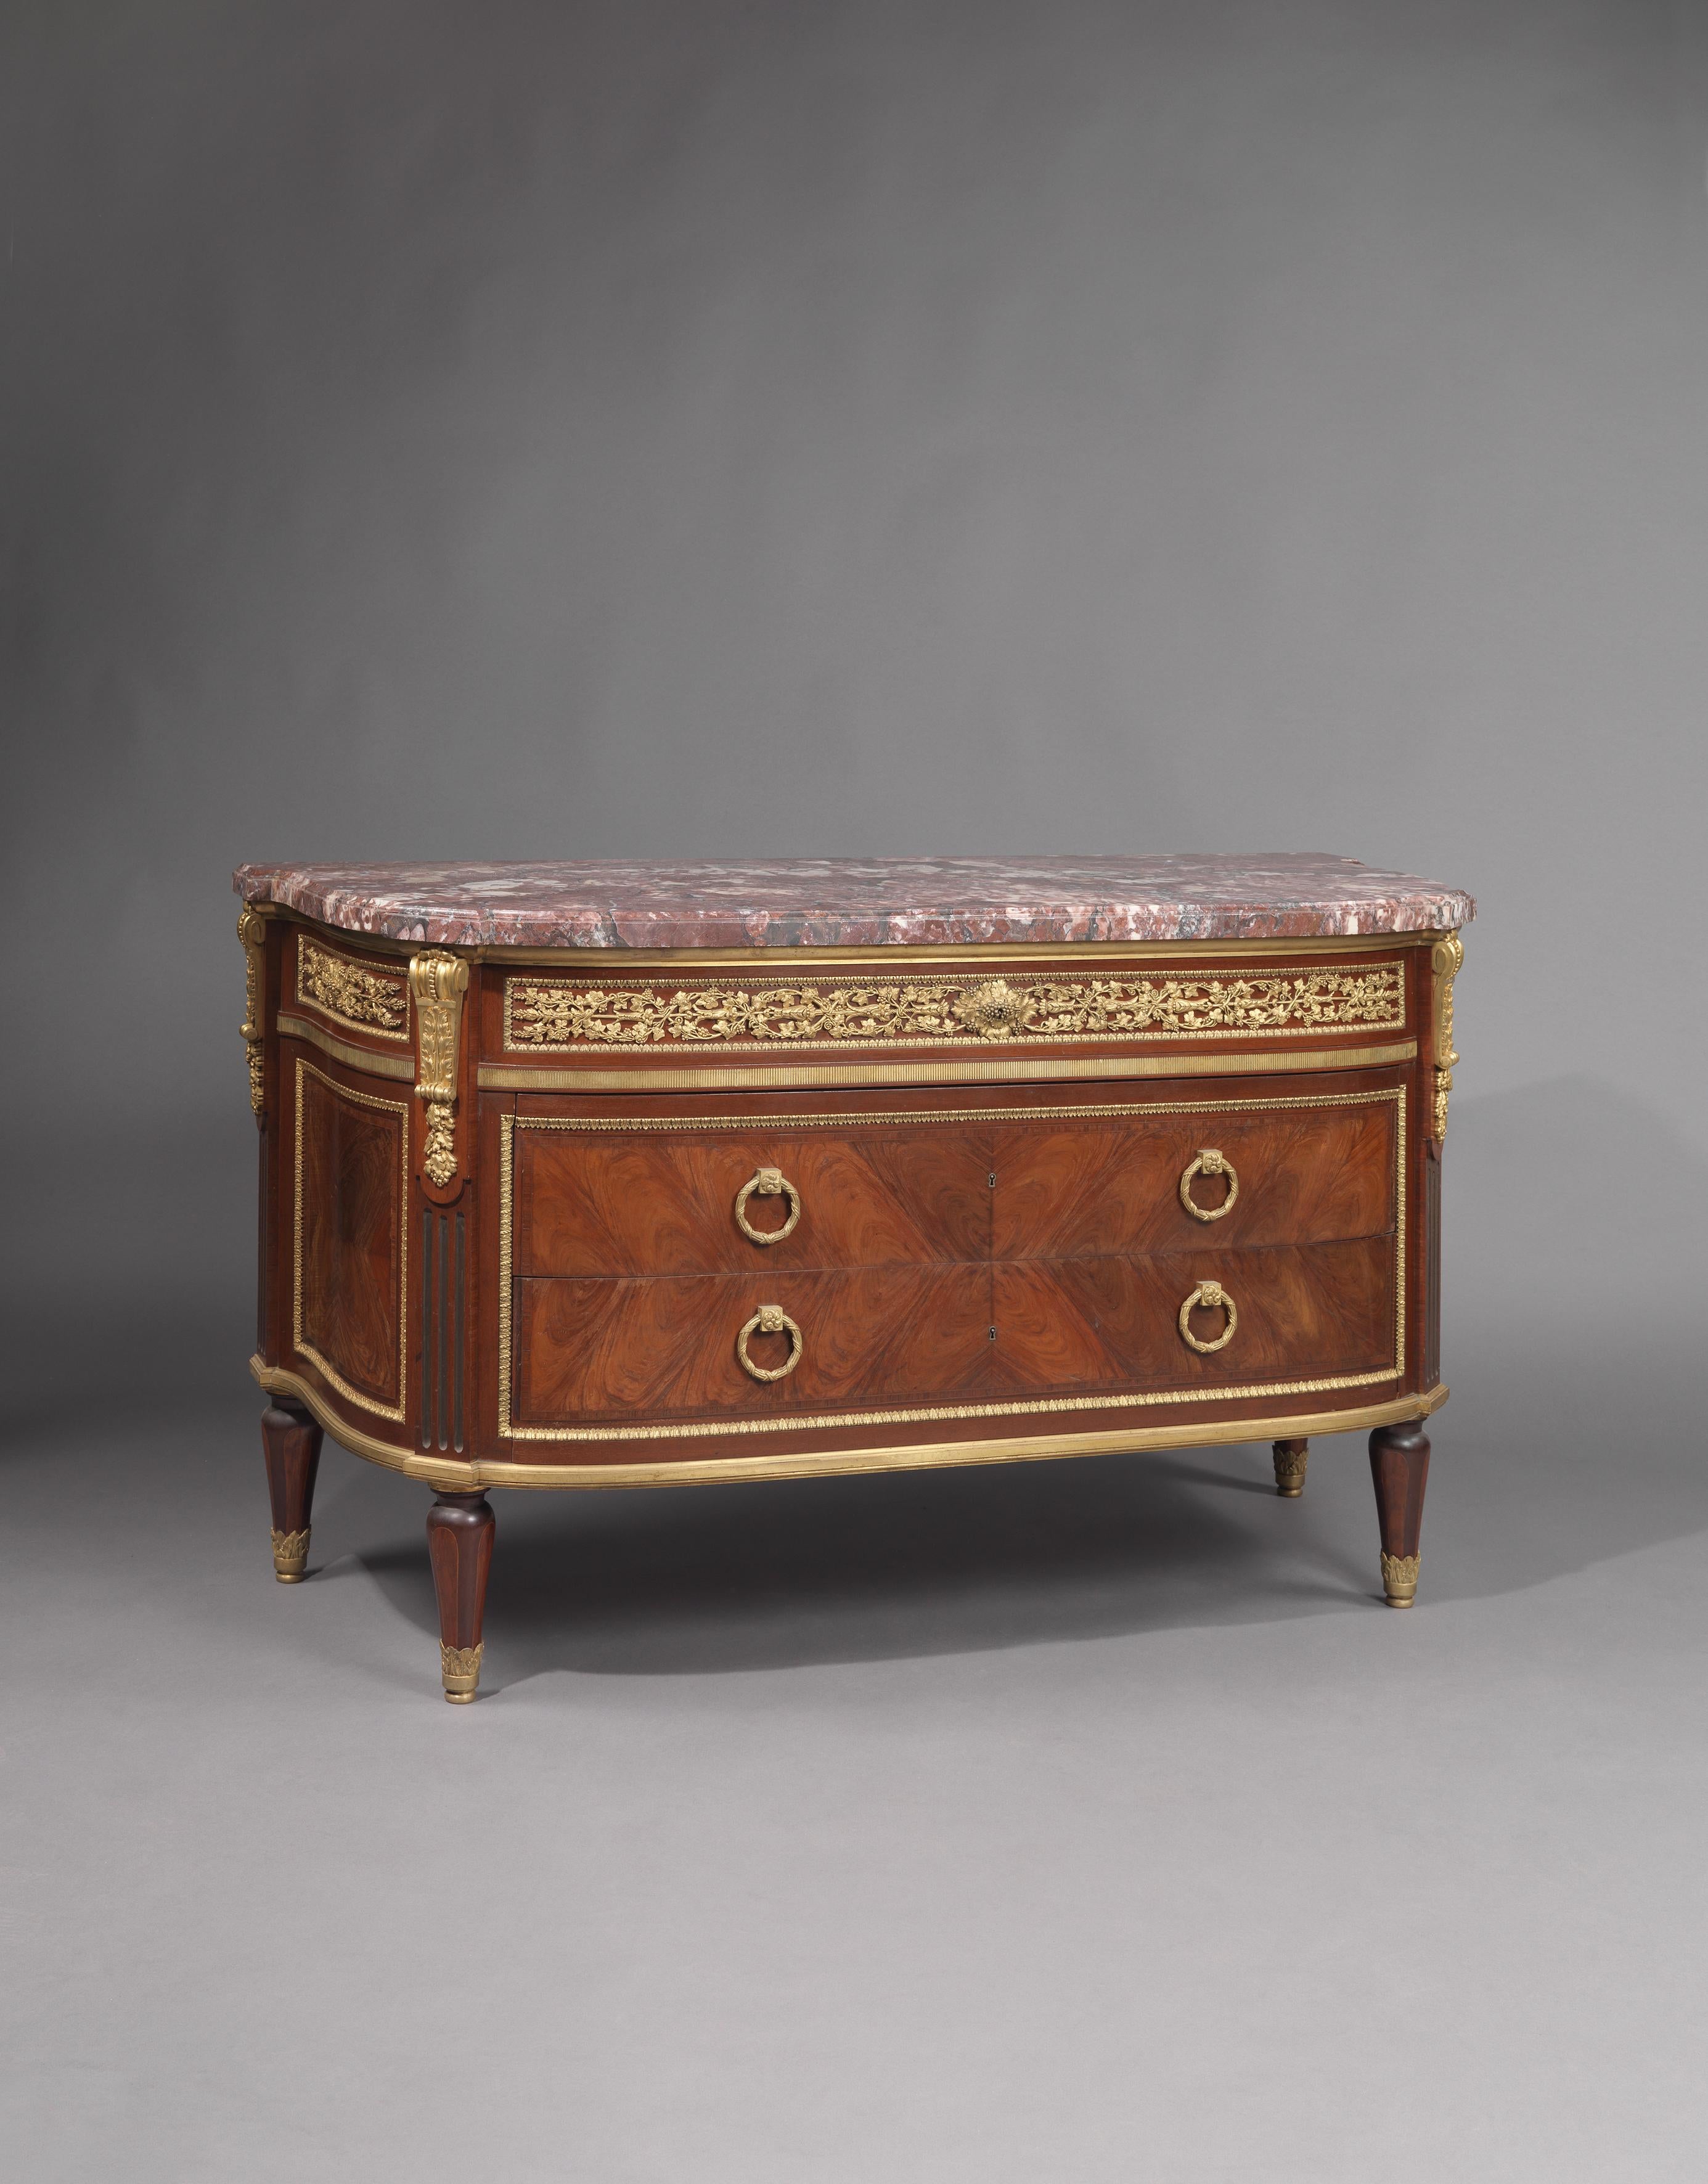 An important Louis XVI style gilt bronze-mounted commode, after the model by Jean-Francois Leleu by François Linke.

French, circa 1910.

Linke index number: 1127.
Linke title: 'Commode Louis XVI, Bois d'amarante et de rose.'
Signed ‘Linke’ to